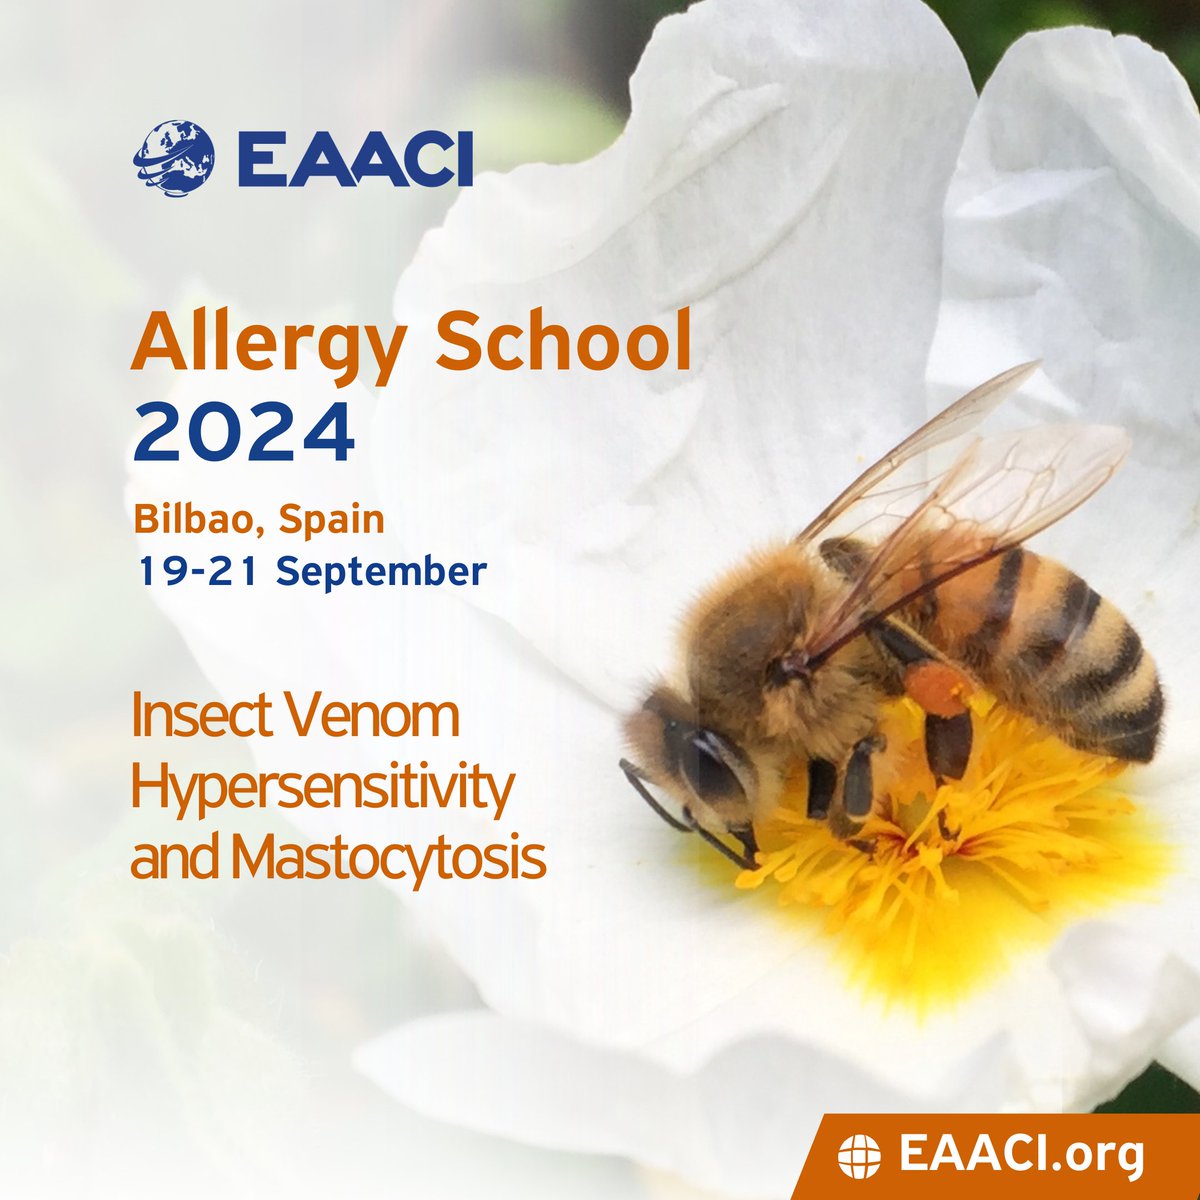 📢 Calling all #healthcareProfessionals ! Join us in Bilbao, Spain, on 19-21 September 2024, at EAACI Allergy School, focused on Insect Venom Hypersensitivity and Mastocytosis—abstract submission deadline: June 10. Register now and submit your abstract! ow.ly/gaPB50RcfXY